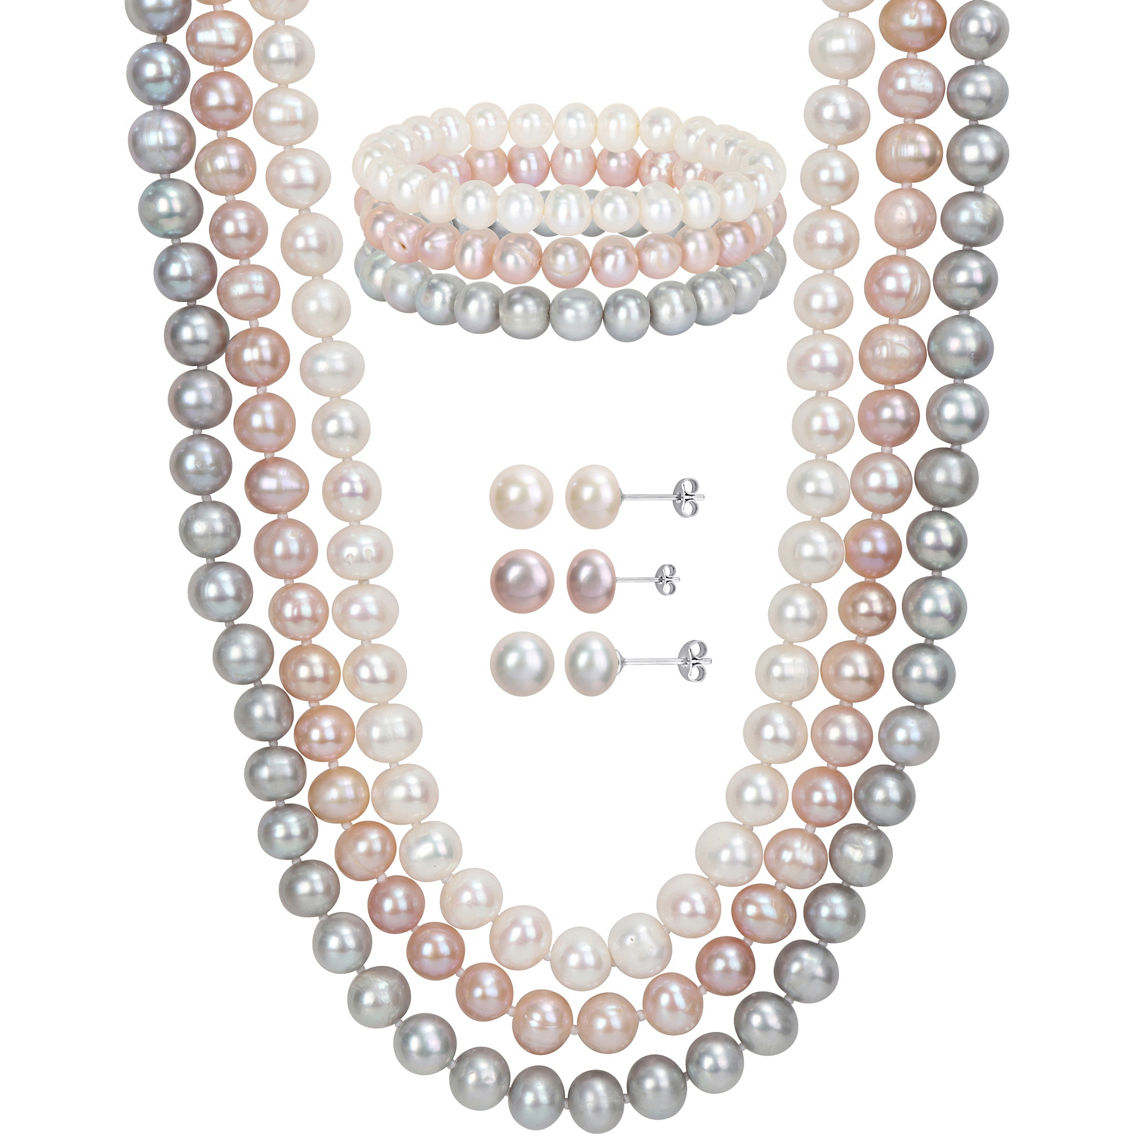 Sofia B. Cultured Freshwater Pearl Necklace, Bracelet and Earrings 9 pc. Set - Image 1 of 5